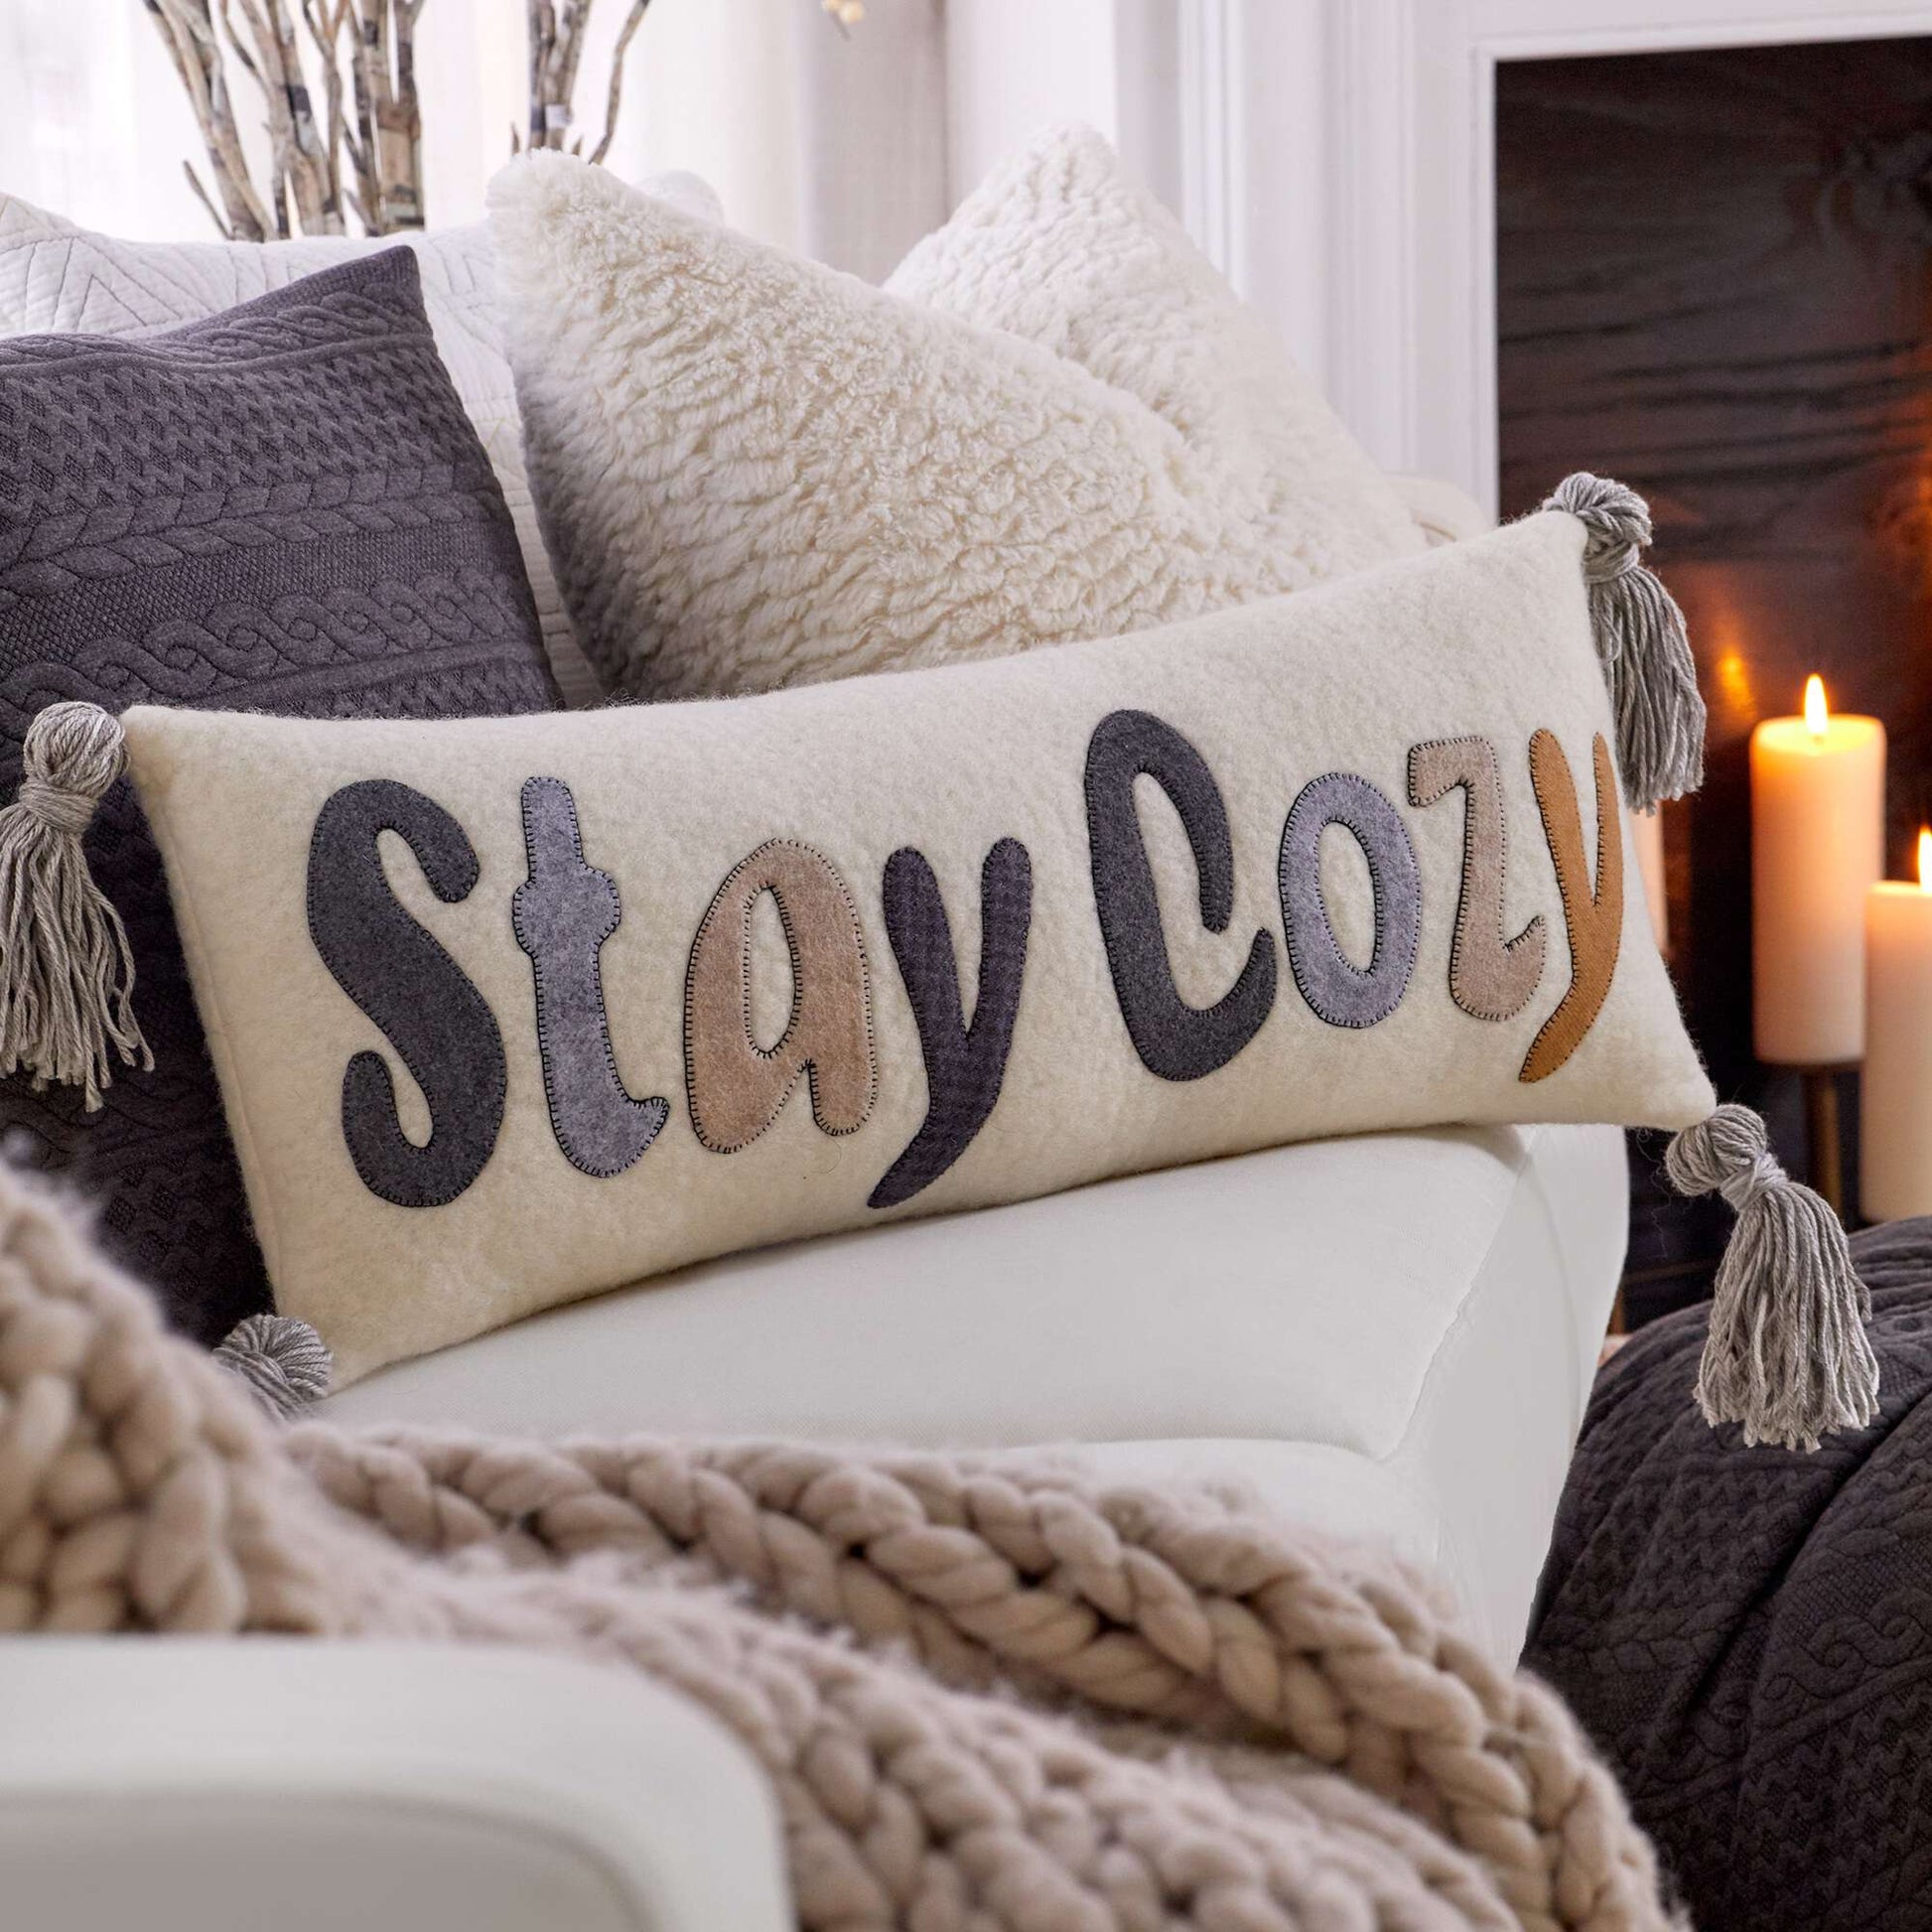 Free Coats & Clark Stay Cozy Pillow With Tassels Sewing Pattern